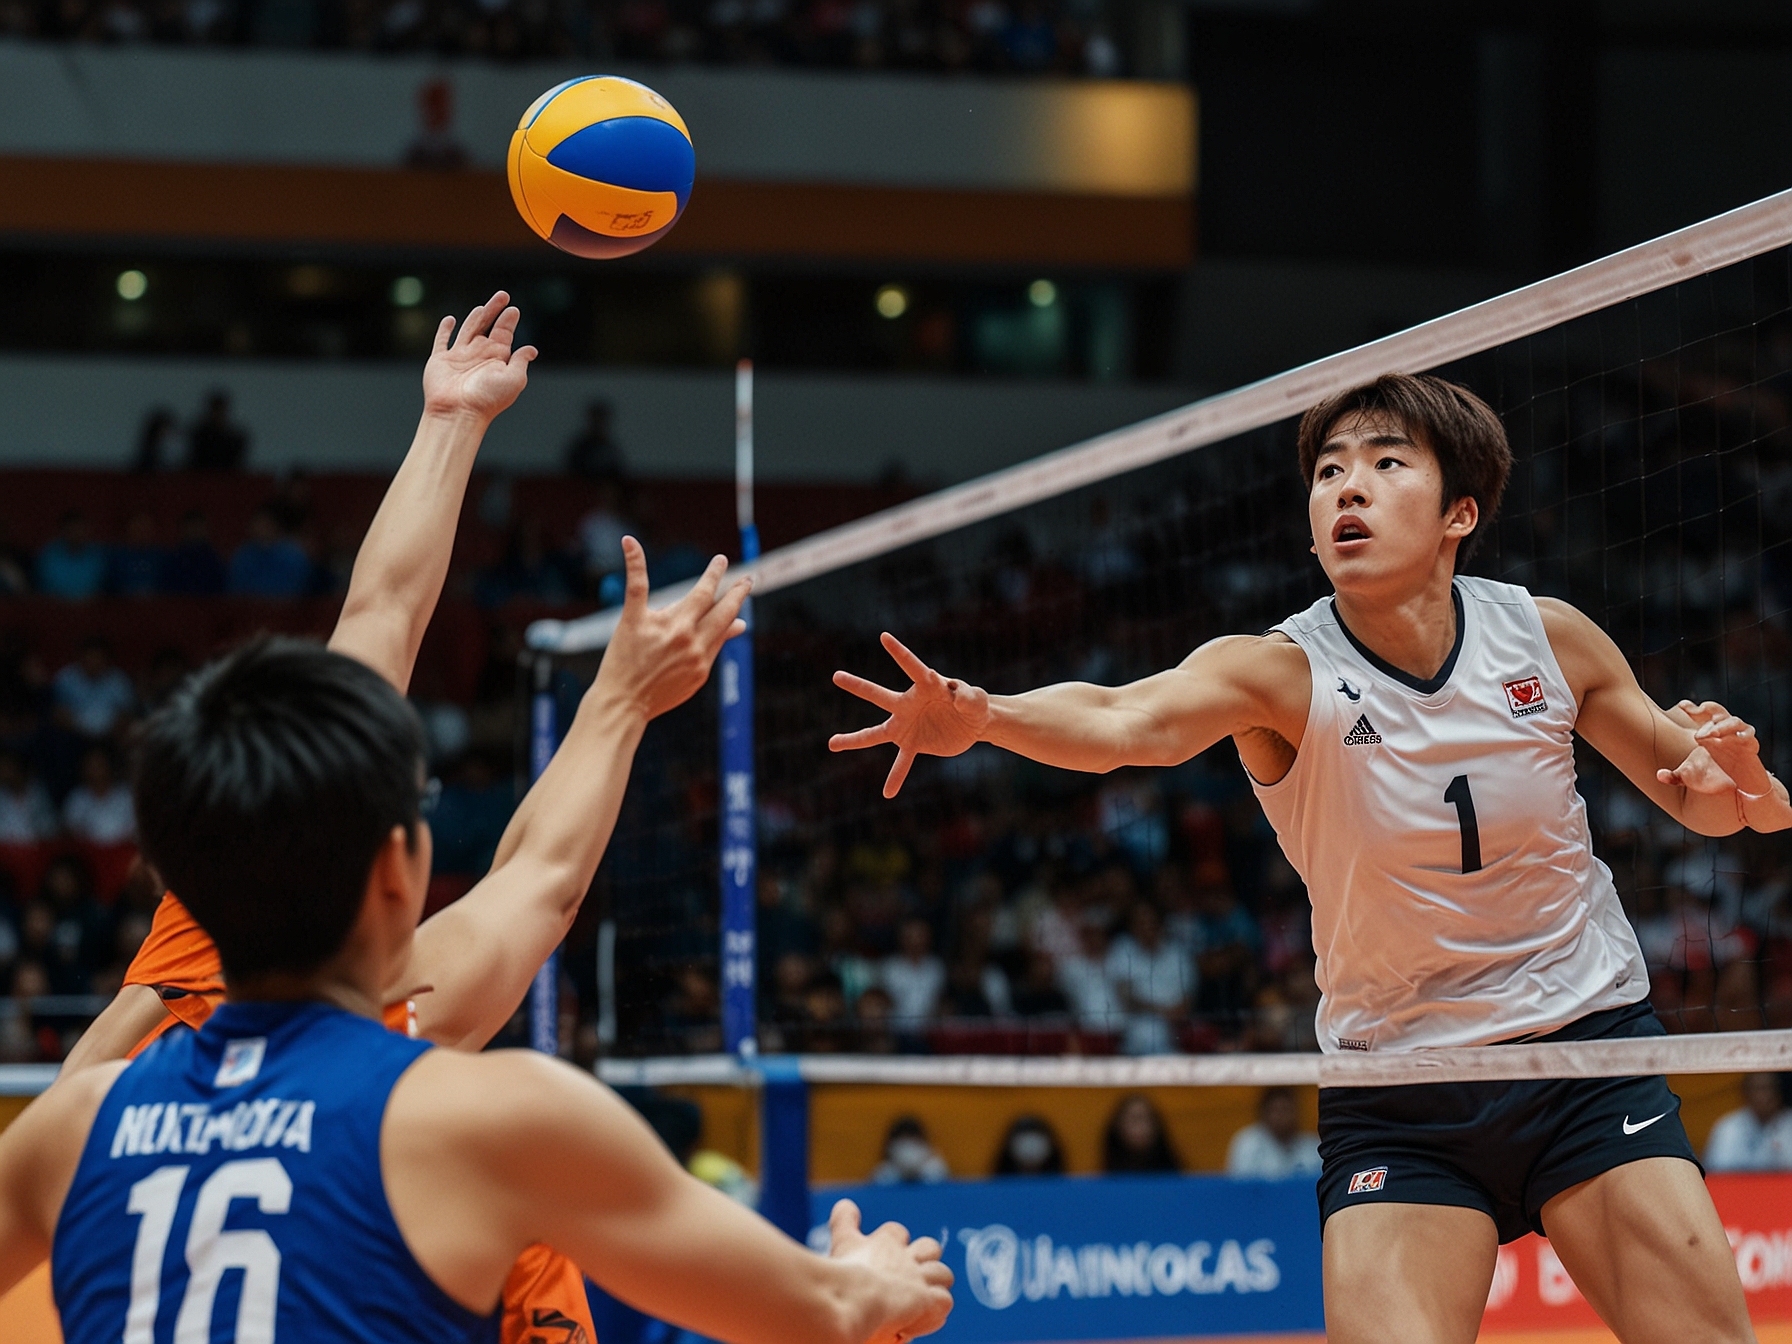 Yuki Ishikawa skillfully maneuvers a play against Dutch defenders, showcasing his versatility and contributing significantly to Japan's 3-0 win in the VNL match held in Manila.